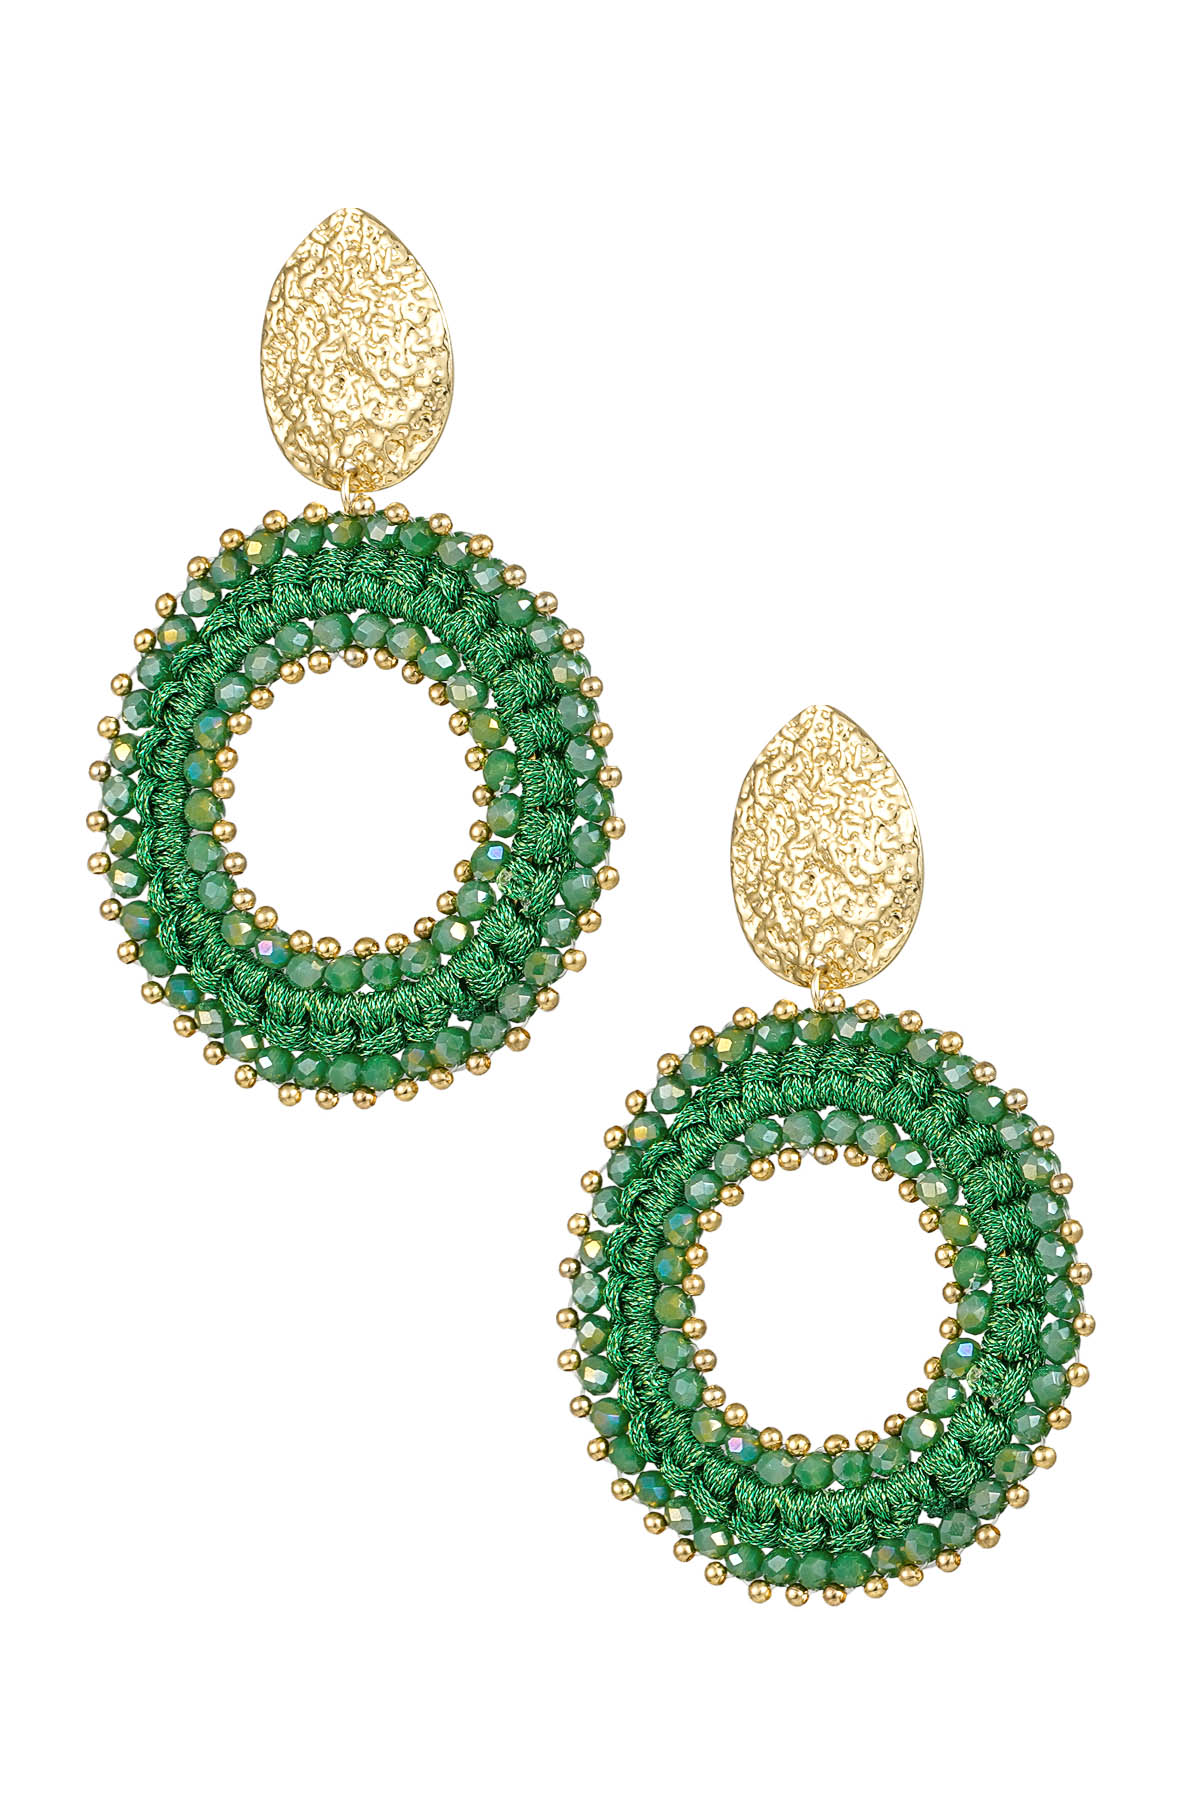 Round earrings with beads - gold/green